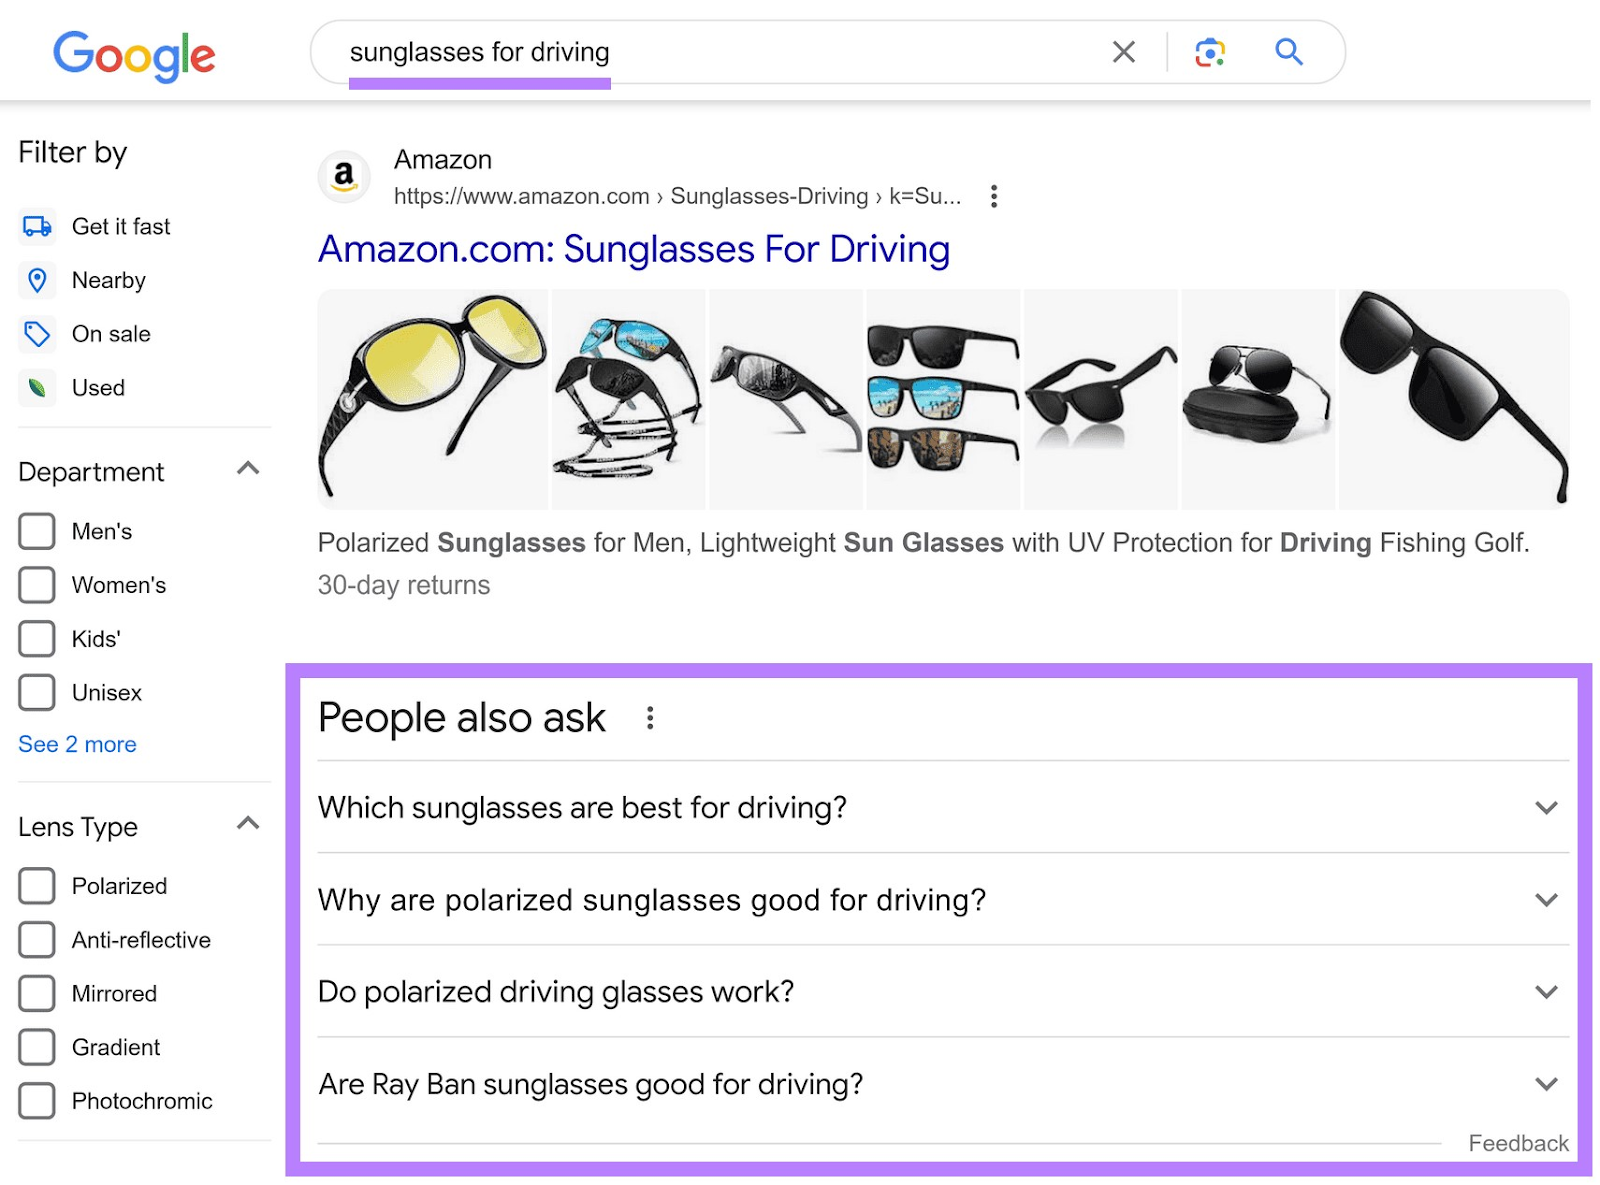 People Also Ask box highlighted on Google SERP for "sunglasses for driving" query